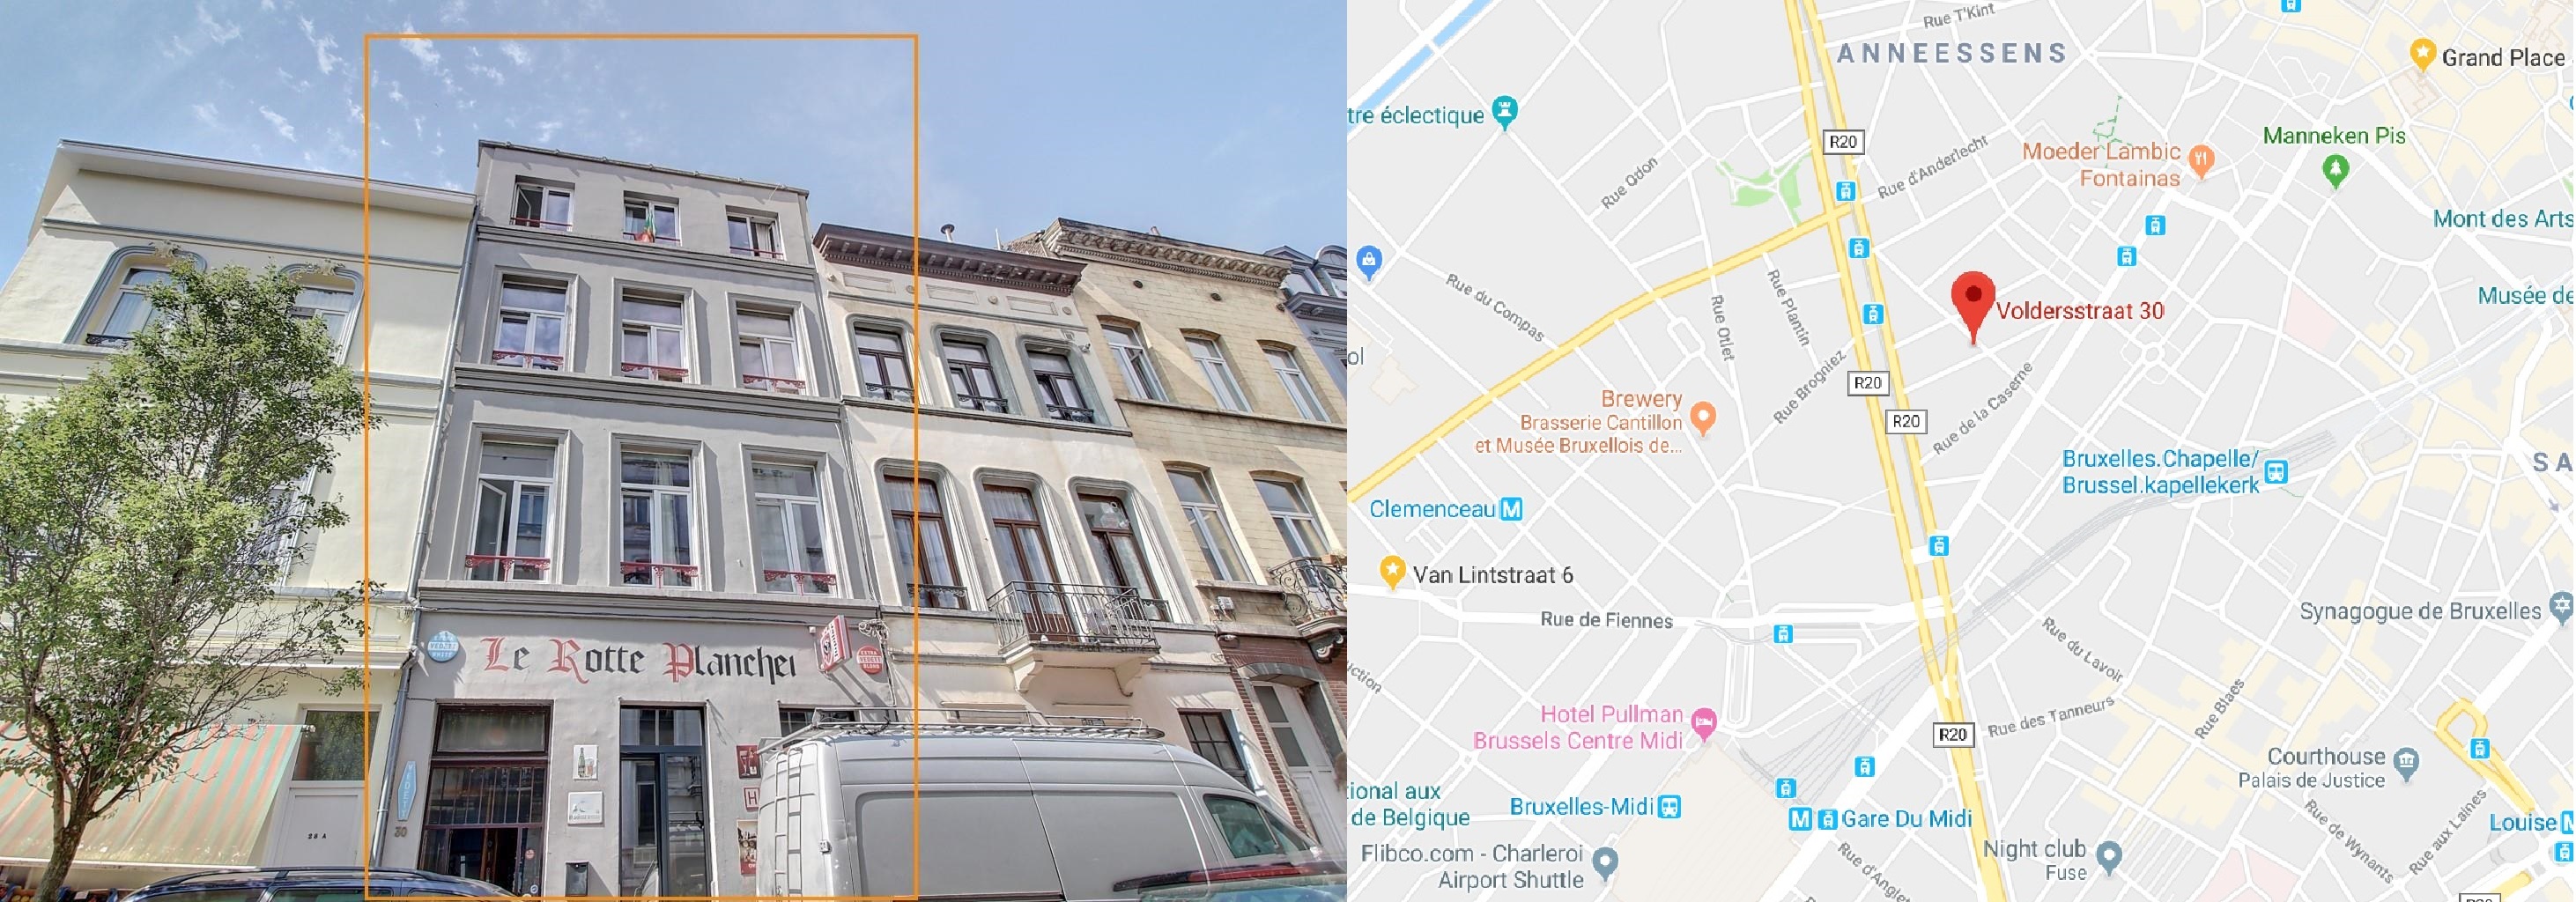 map and picture of the waffle workshop in brussels, belgium